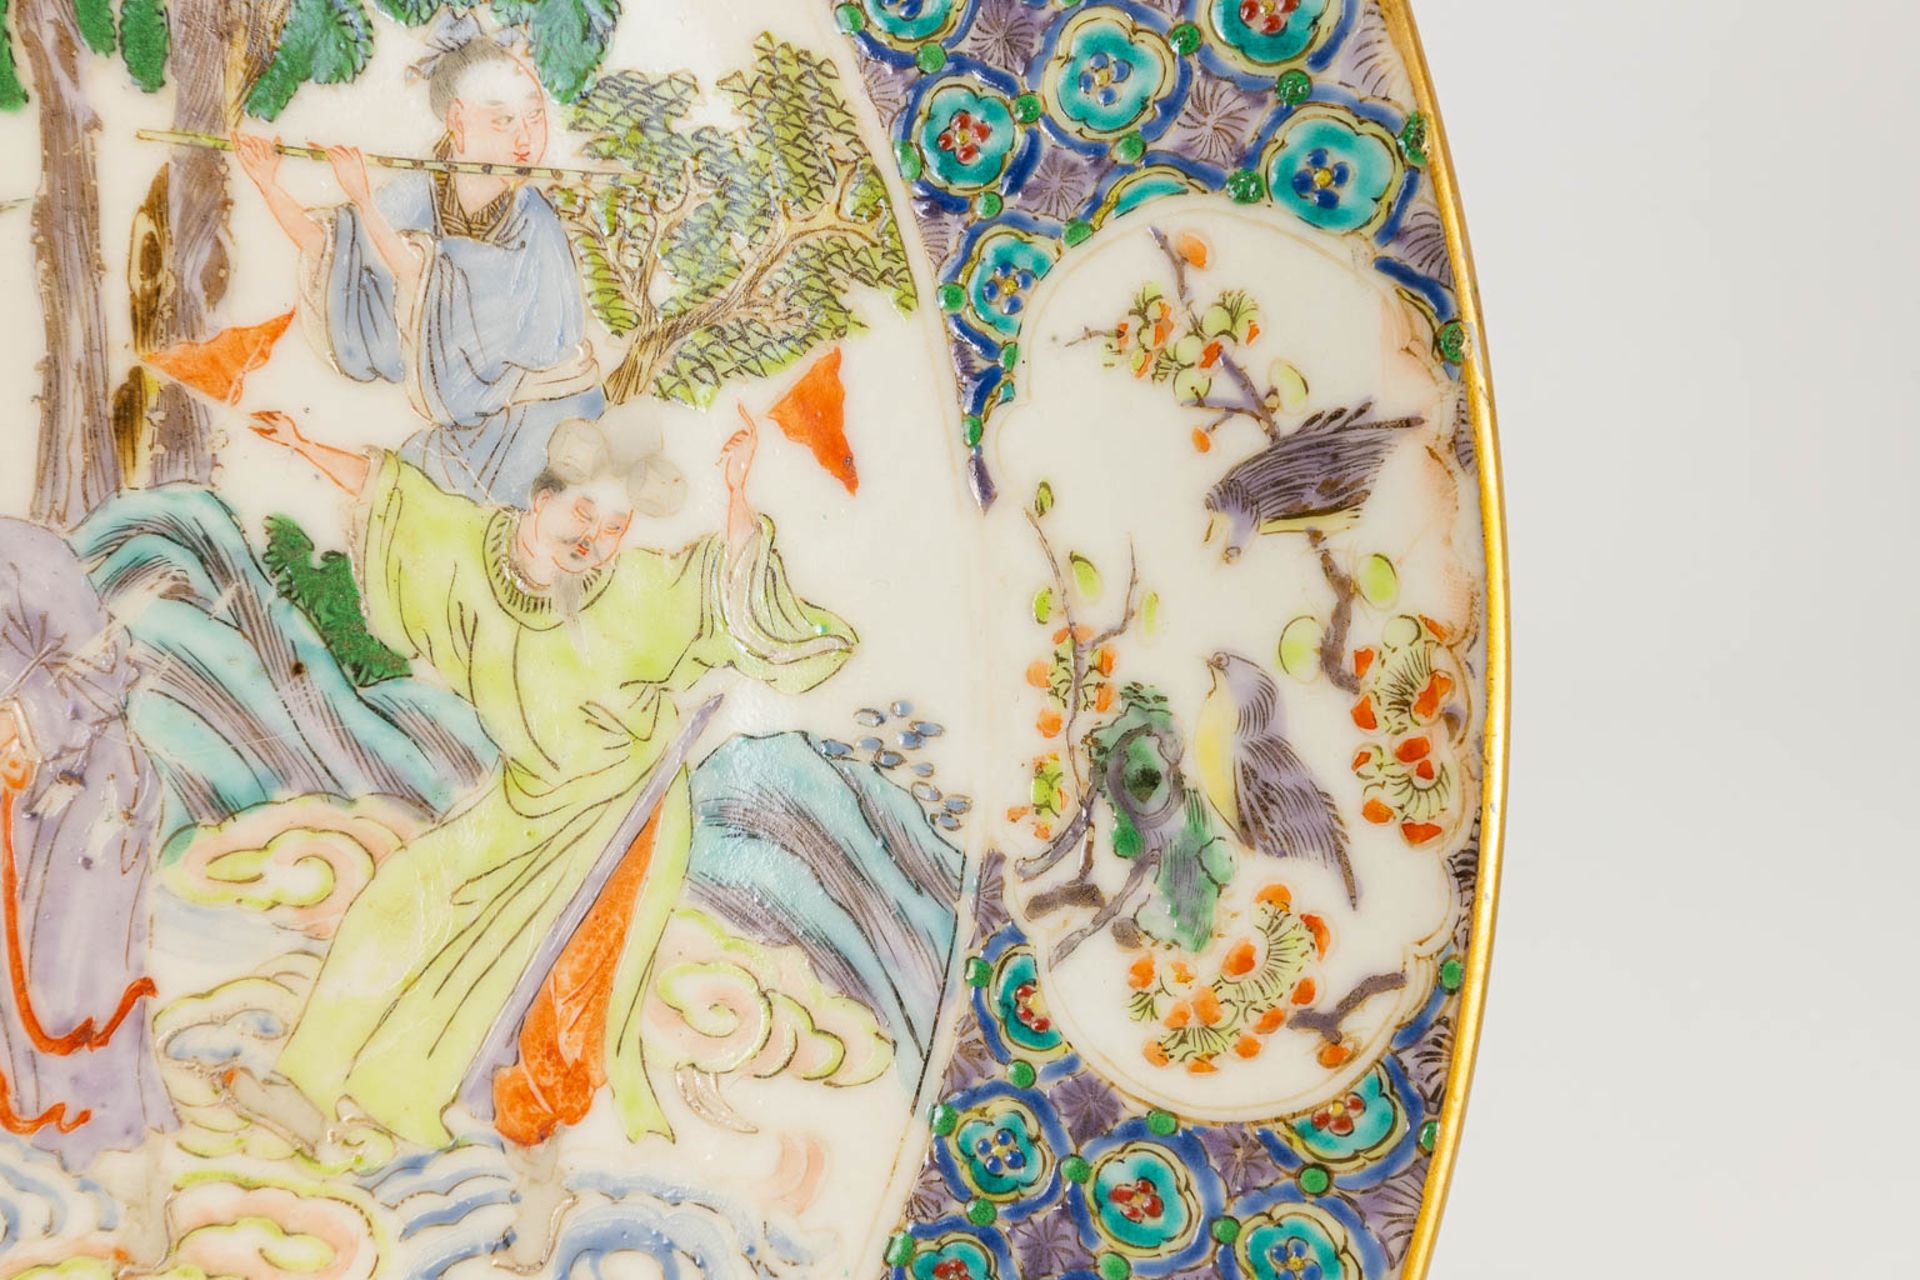 A pair of plates made of Chinese porcelain in Kanton style. 19th century. - Image 16 of 24